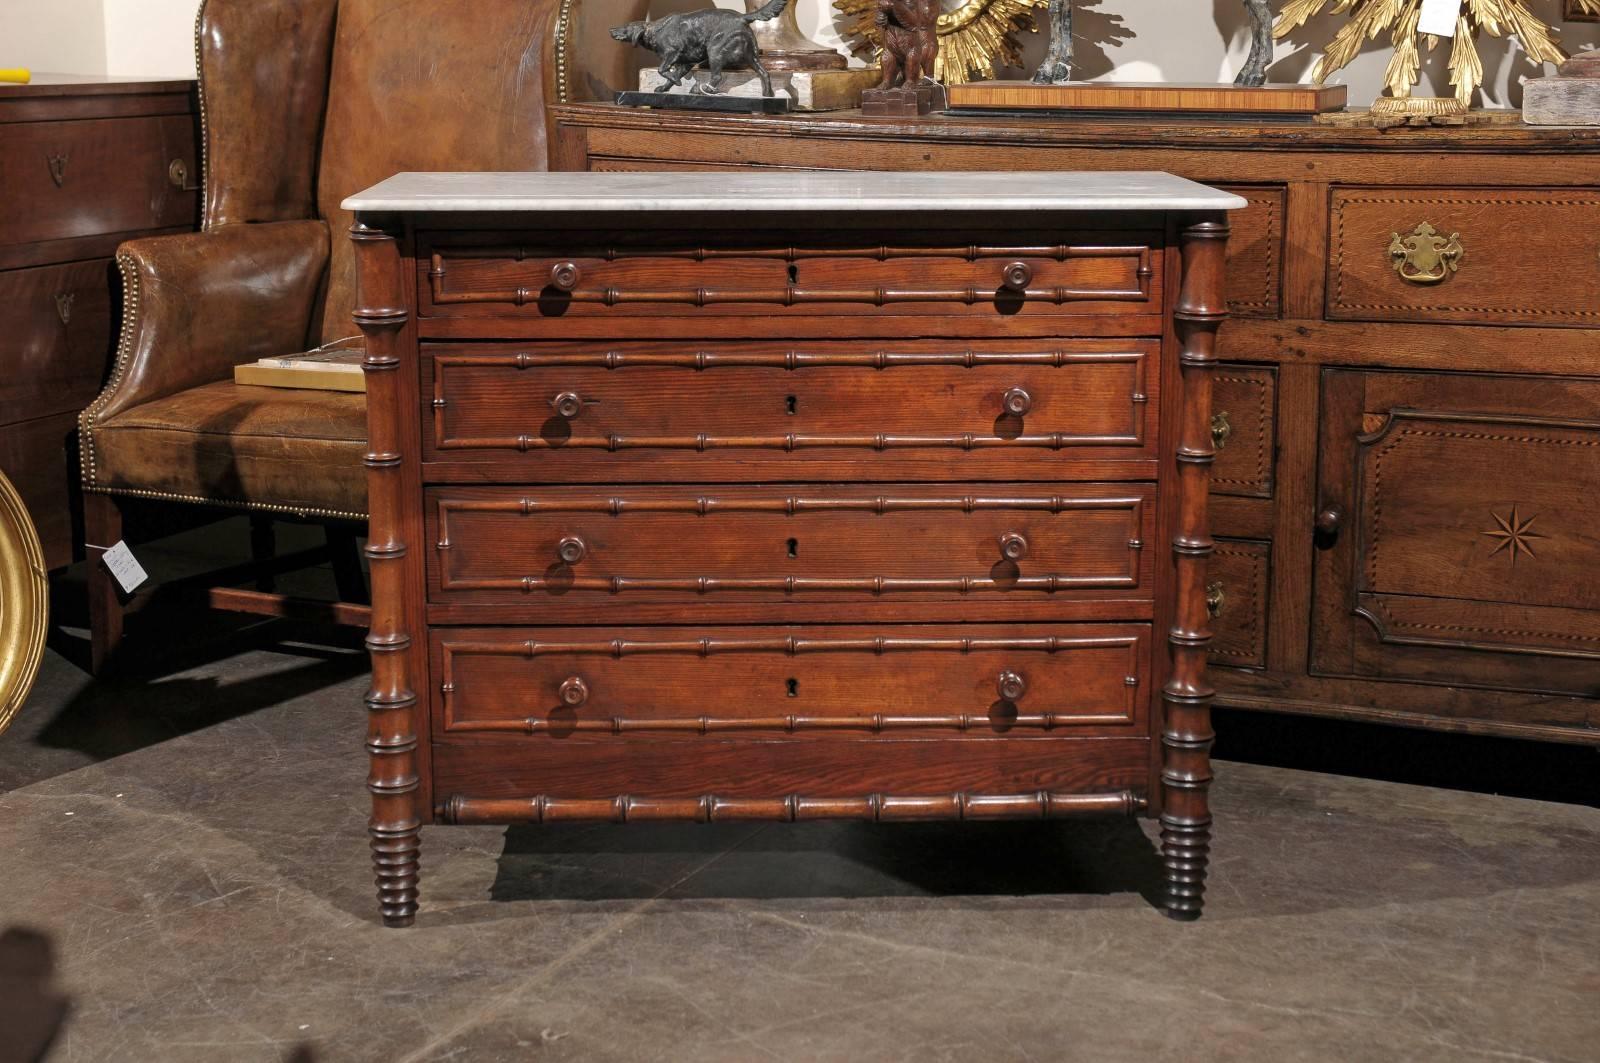 This 19th century English chest of drawers is adorned with a faux bamboo trim on both front and sides as well as the posts ending on unusual bobbin-turned feet at the front. The rectangular white marble top, presenting an incised line originally to